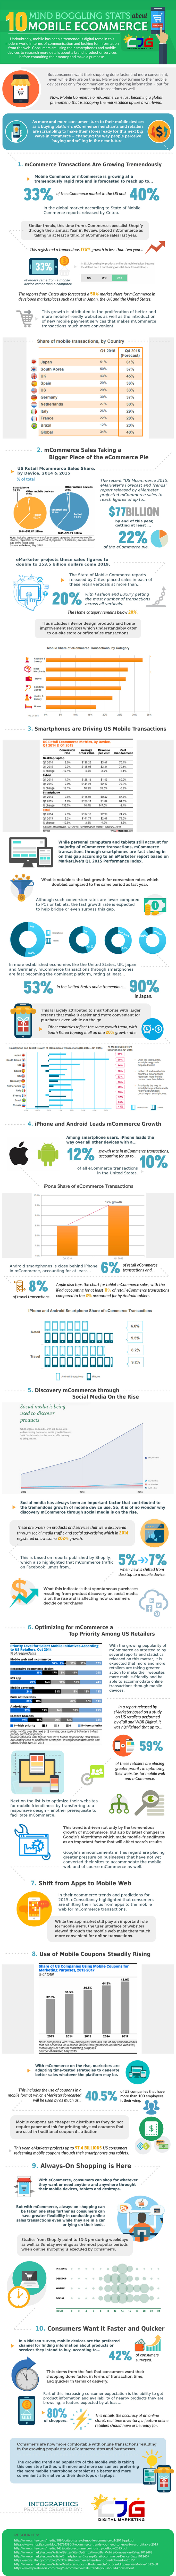 Mobile ecommerce stats